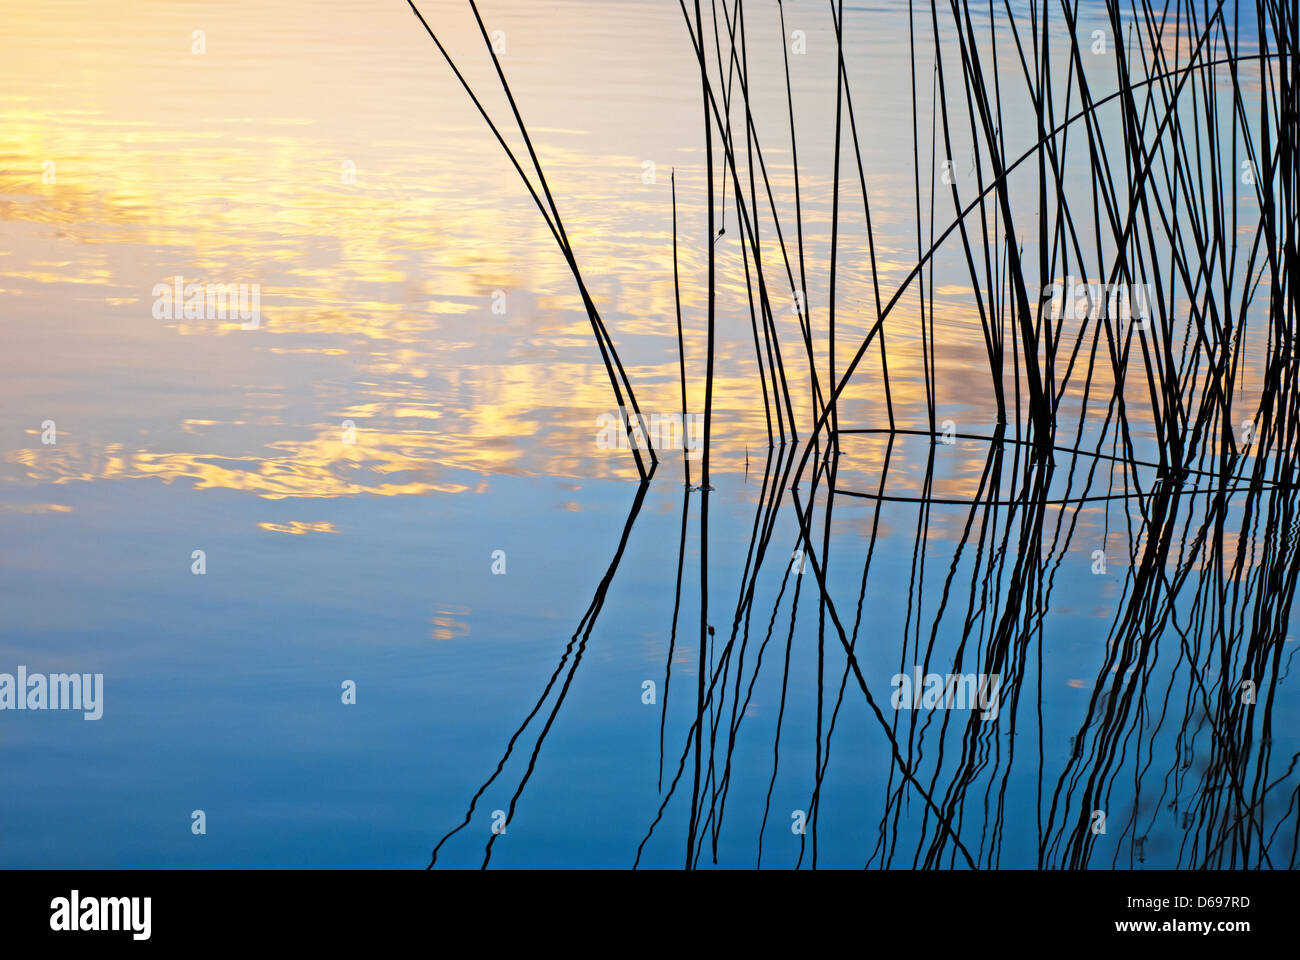 Morning lake landscape with silhouette of reeds reflected in water Stock Photo